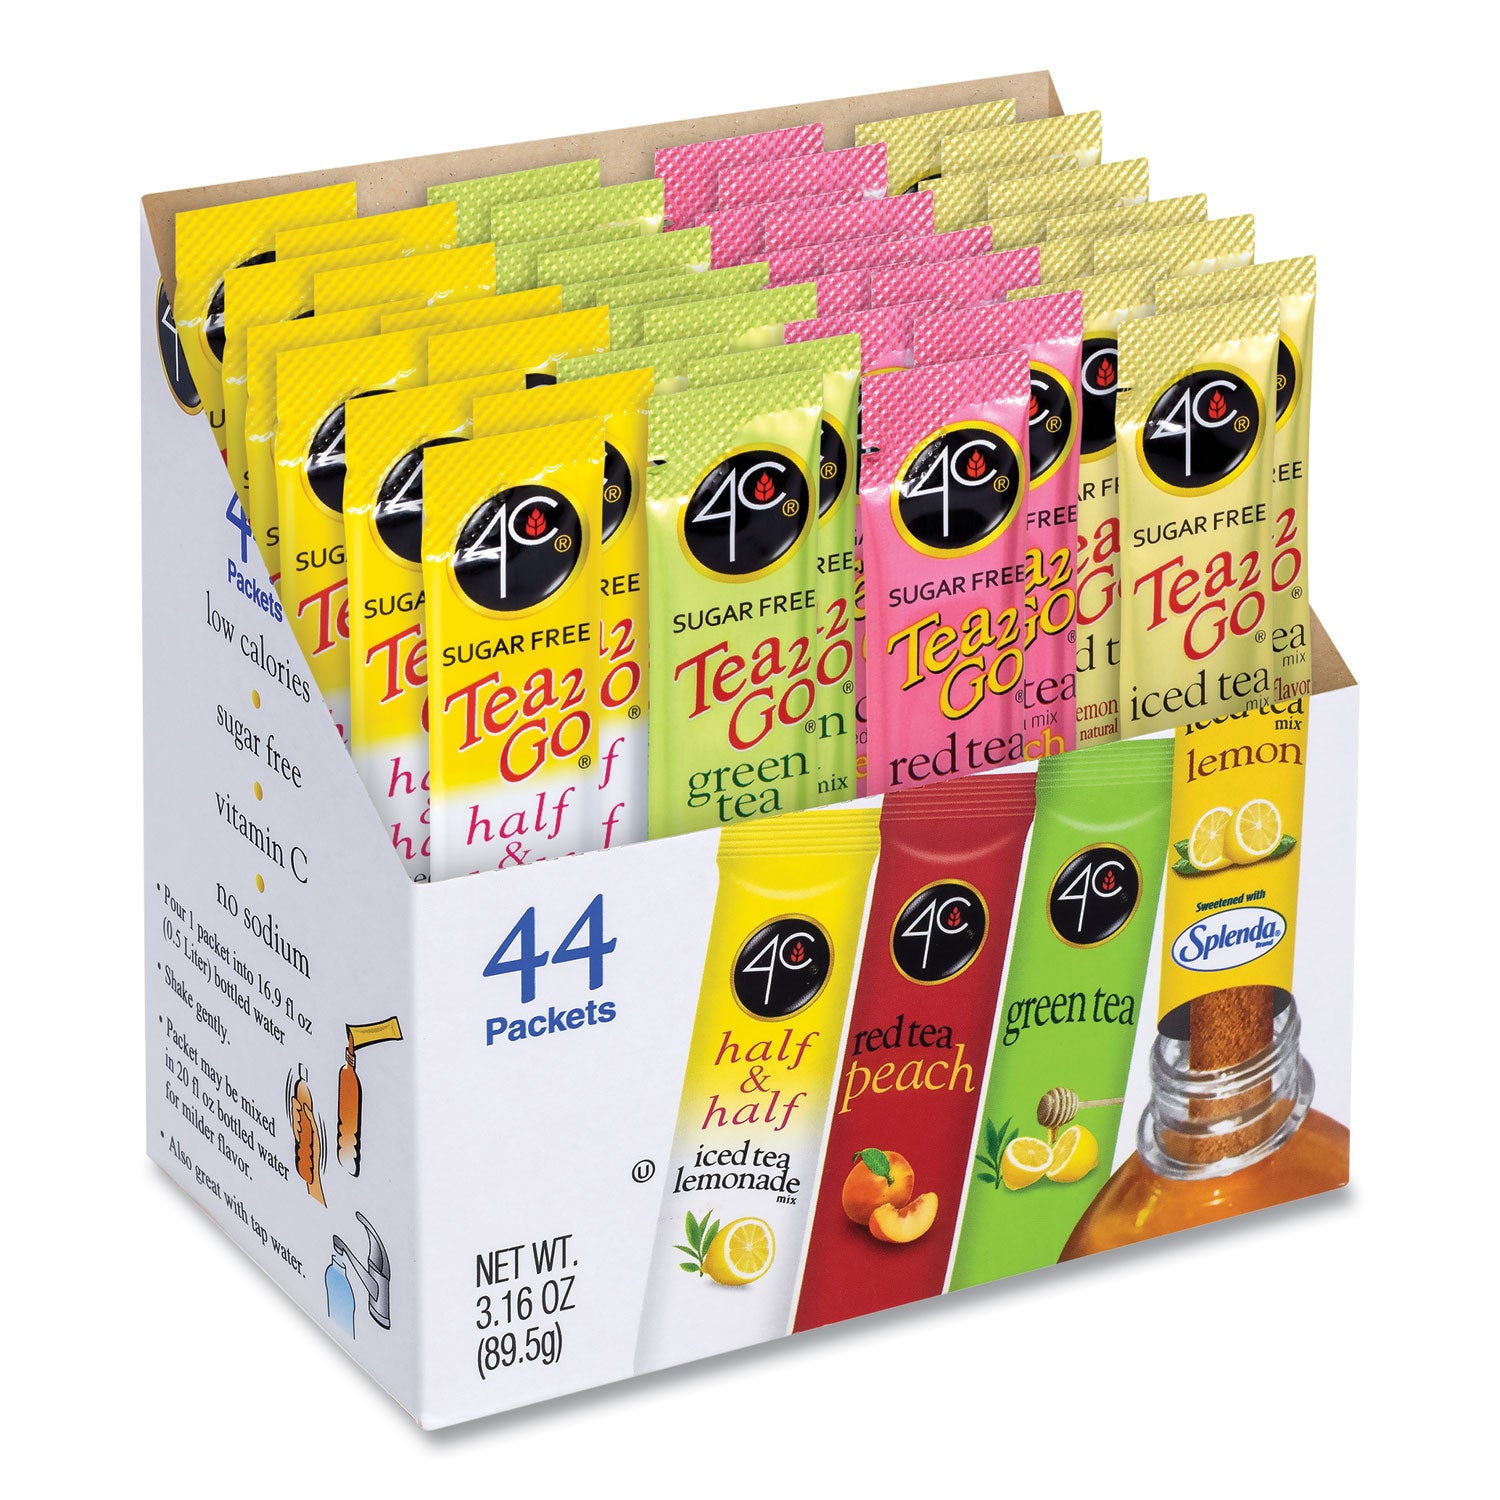 sugar-free-iced-tea-mix-variety-pack-316-oz-box-44-pack-ships-in-1-3-business-days_grr22002009 - 1